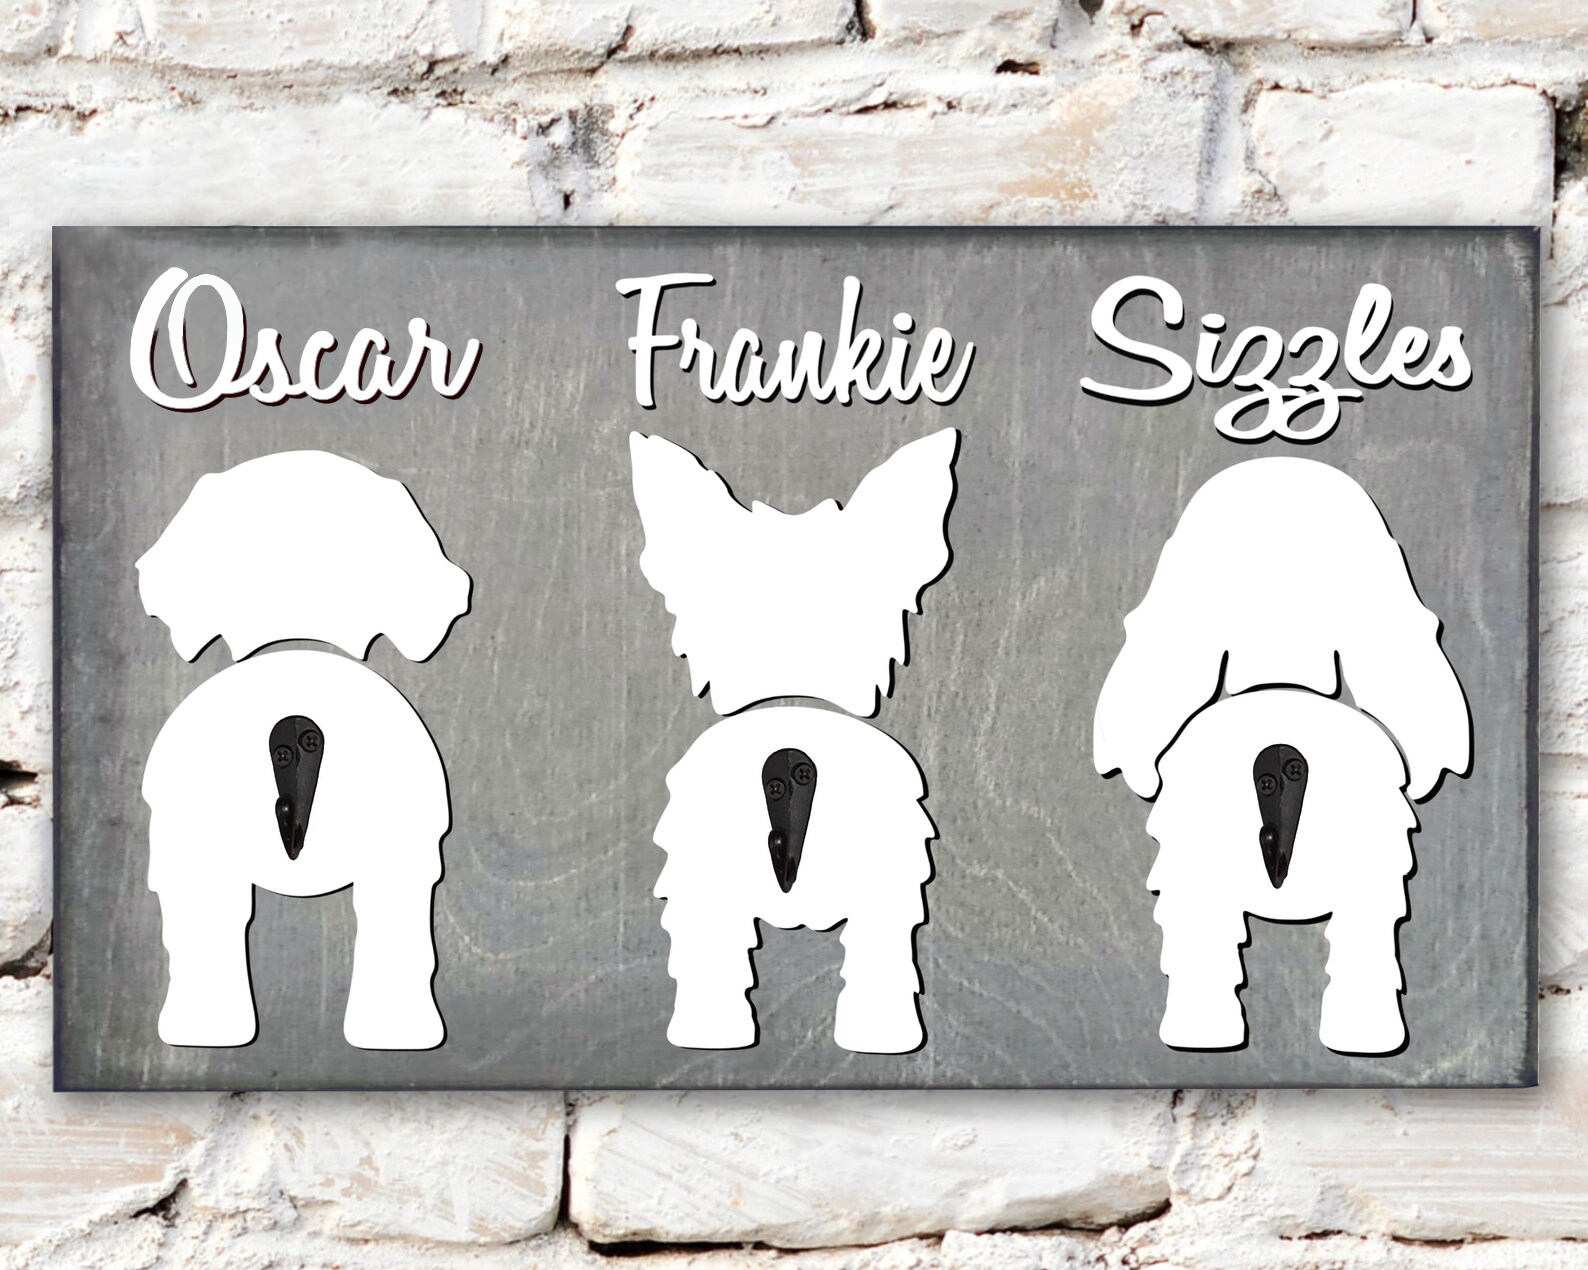 3 dog-Personalized dog key hanger, gifts for dog lovers, housewarming pet gifts, dog gifts.